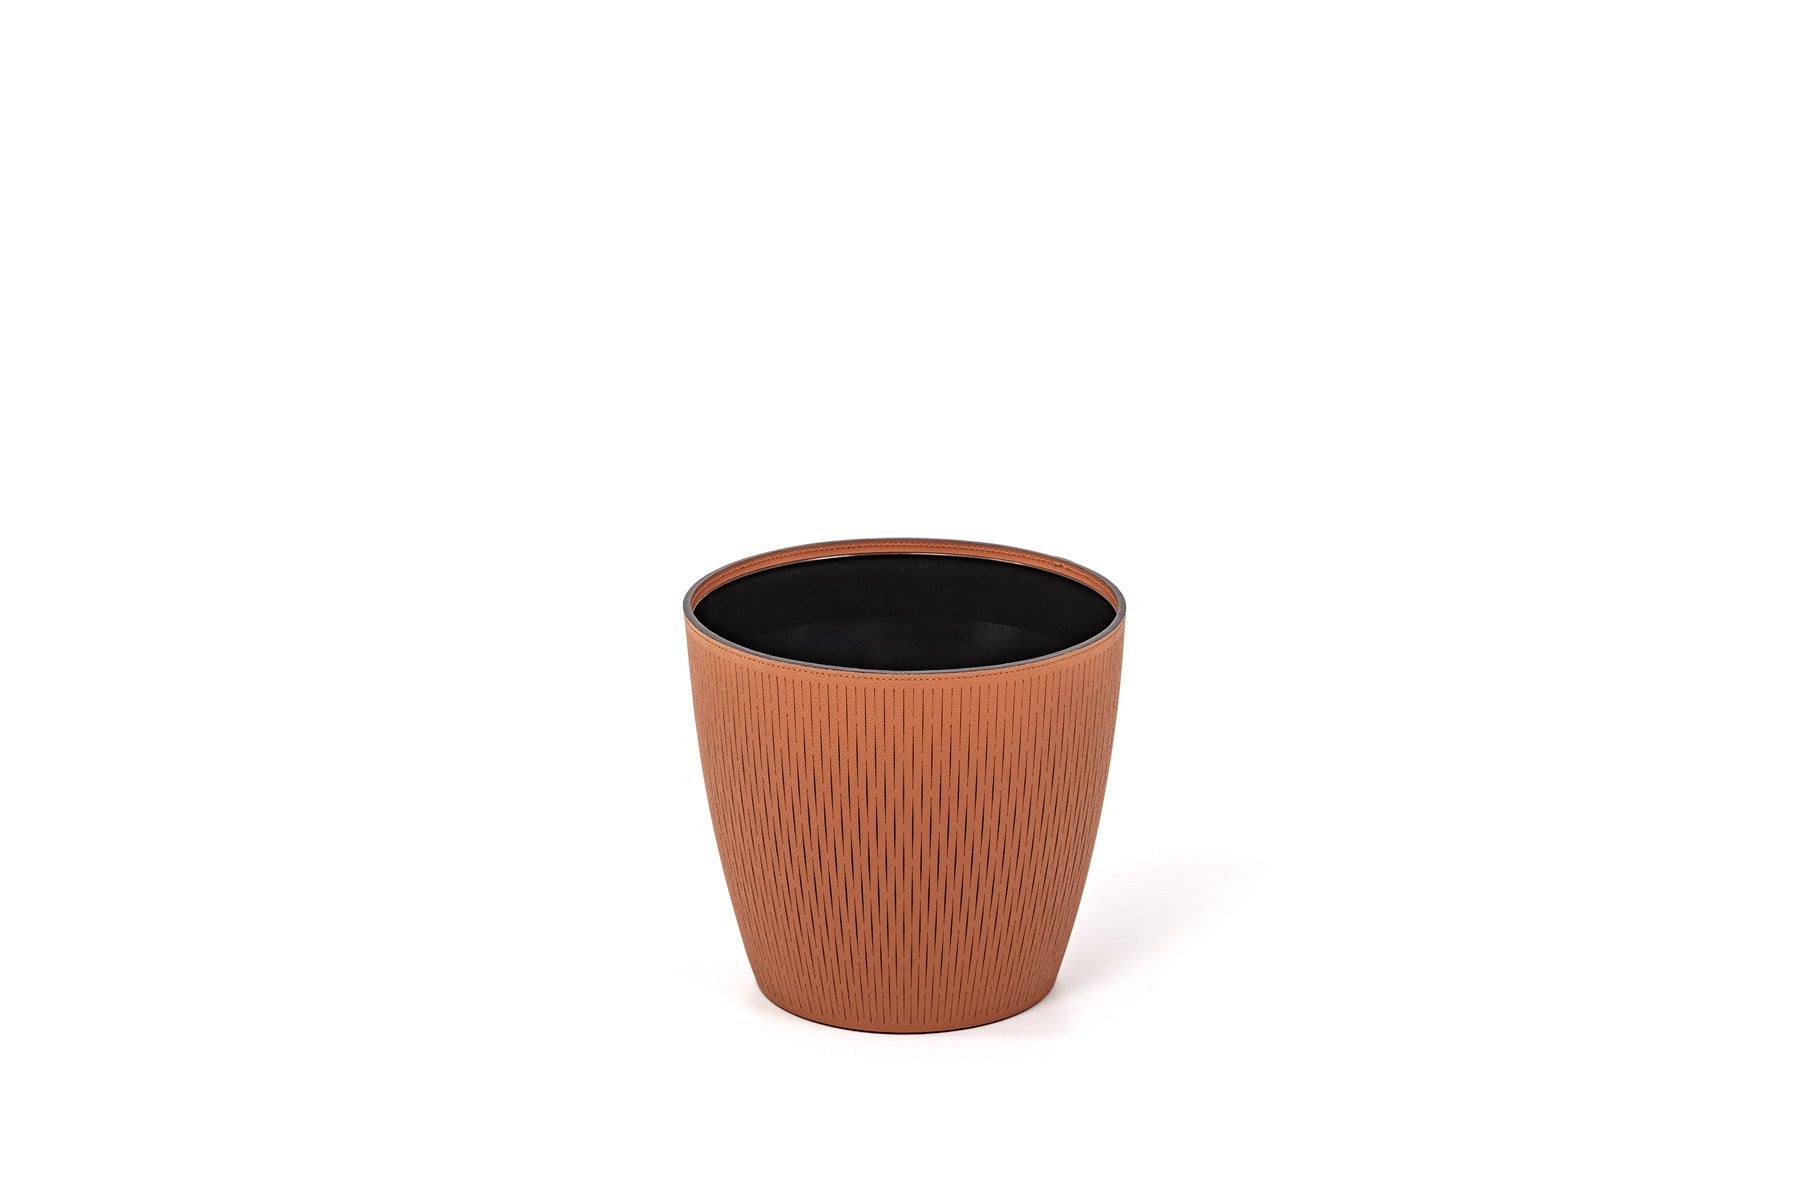 Pinetti Silvy Plastic Flower Pot With Removable Regenerated Leather Cover | Plastic structure with removable leather cover | Available in six different dimensions, with the three larger sizes featuring wheels for easy mobility | Explore Luxury Lifestyle Accessories at 2Jour Concierge, #1 luxury high-end gift & lifestyle shop